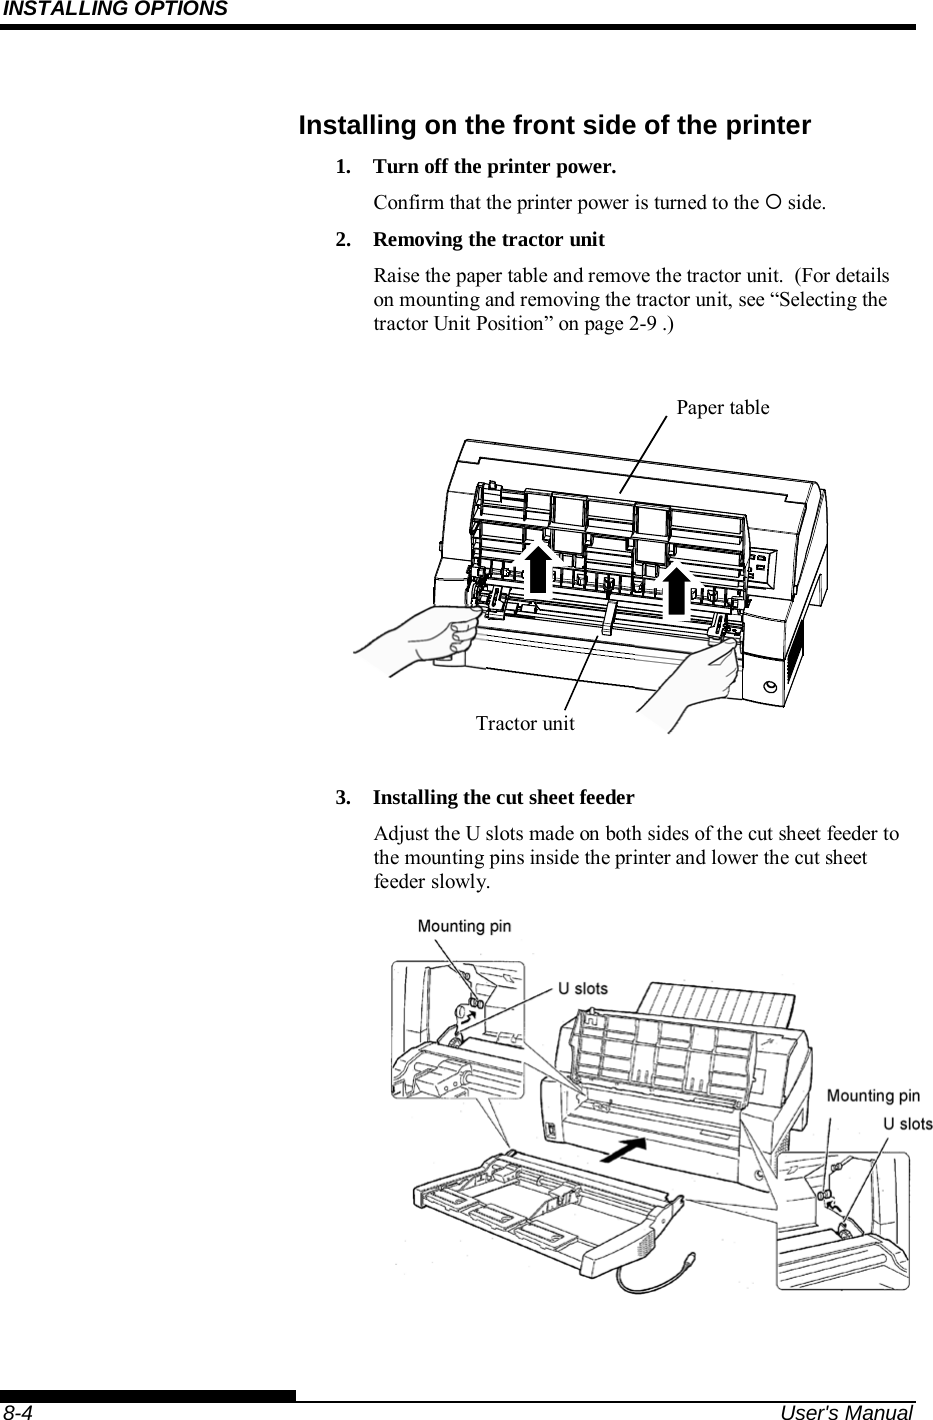 INSTALLING OPTIONS    8-4  User&apos;s Manual Installing on the front side of the printer 1.  Turn off the printer power. Confirm that the printer power is turned to the  side. 2.  Removing the tractor unit Raise the paper table and remove the tractor unit.  (For details on mounting and removing the tractor unit, see “Selecting the tractor Unit Position” on page 2-9 .)             3.  Installing the cut sheet feeder Adjust the U slots made on both sides of the cut sheet feeder to the mounting pins inside the printer and lower the cut sheet feeder slowly.    Paper table Tractor unit 